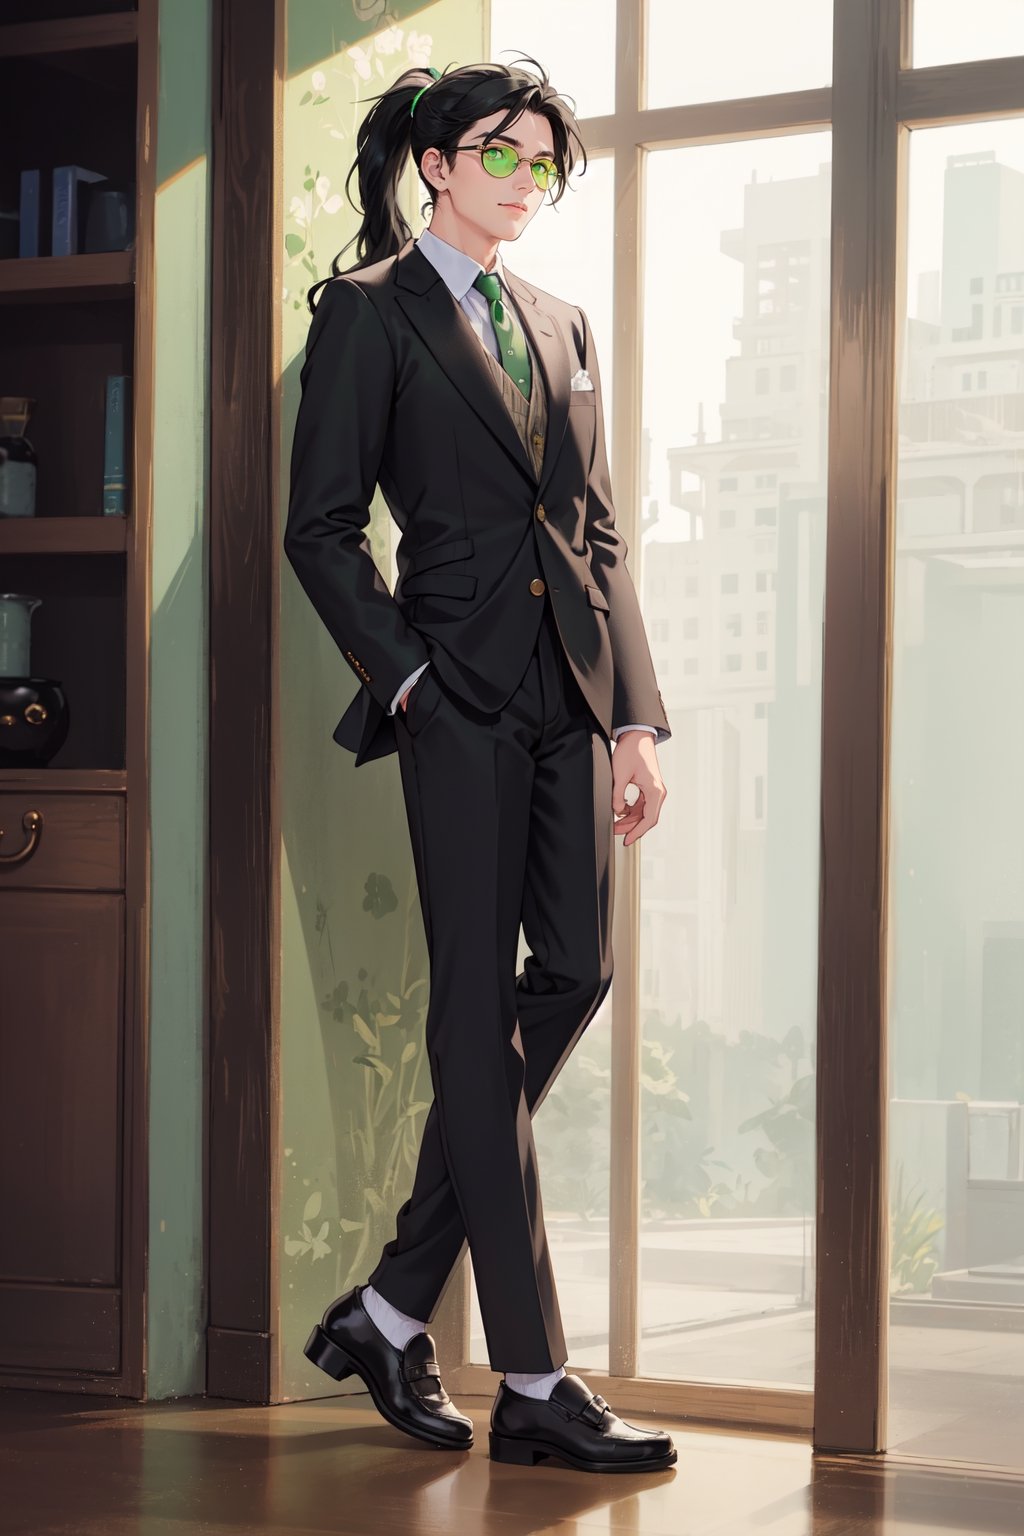  (masterpiece, Best quality, a high resolution, ultra detailed), (beautiful and aesthetically pleasing: 1.2), ((1 man)), adult, ((black hair)), ((long wavy ponytail hair)), ((Green eyes)), Male focus, male body, (slight smile: 0.8), detailed eyes and face , Full length figure, Tailored suit jacket, Crewneck sweater, Tapered trousers, Monk strap shoes, Leather portfolio, Classic aviator sunglasses